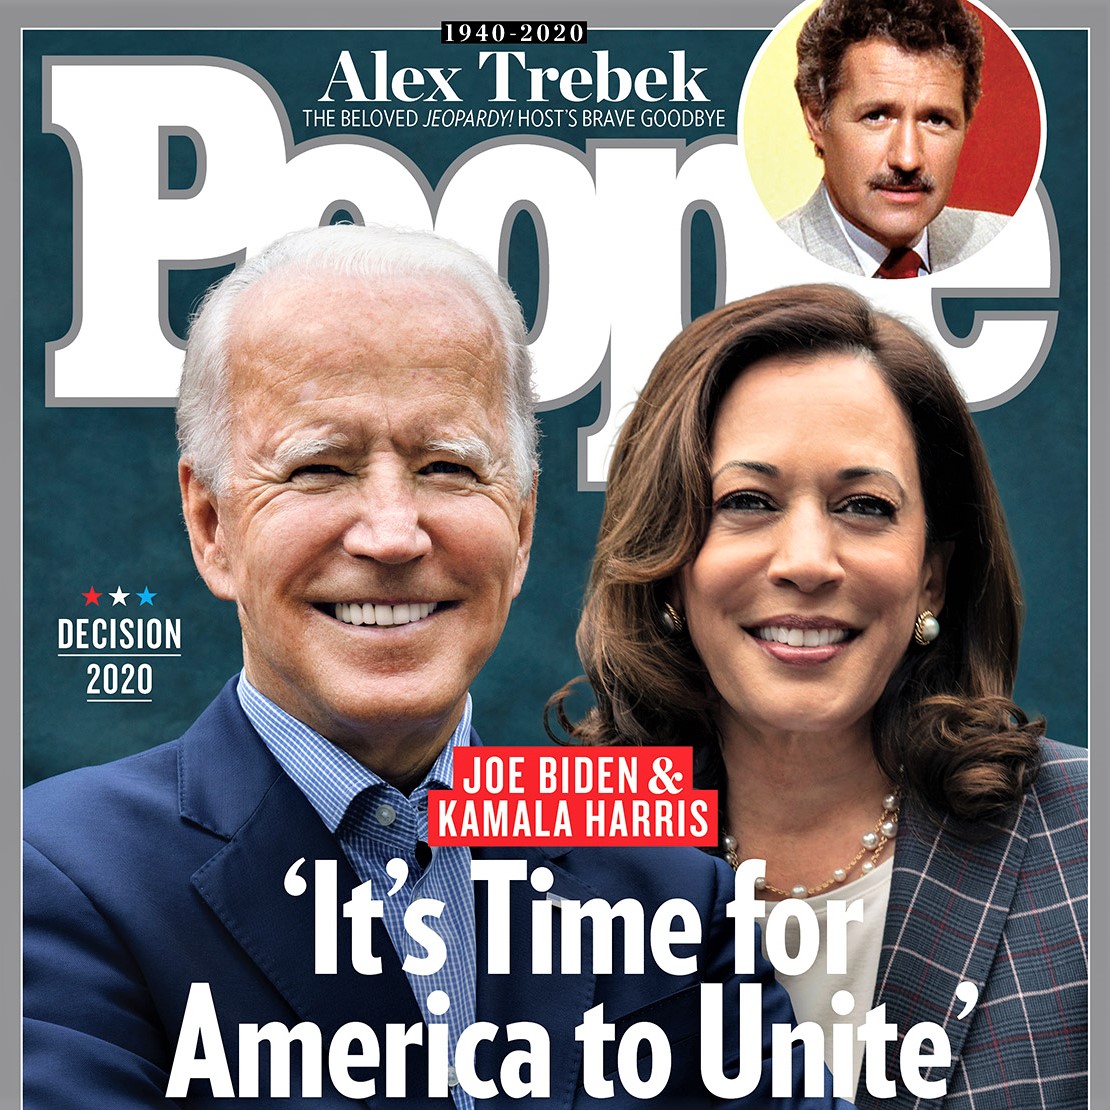 Magazine covers celebrate America returning to normalcy: People